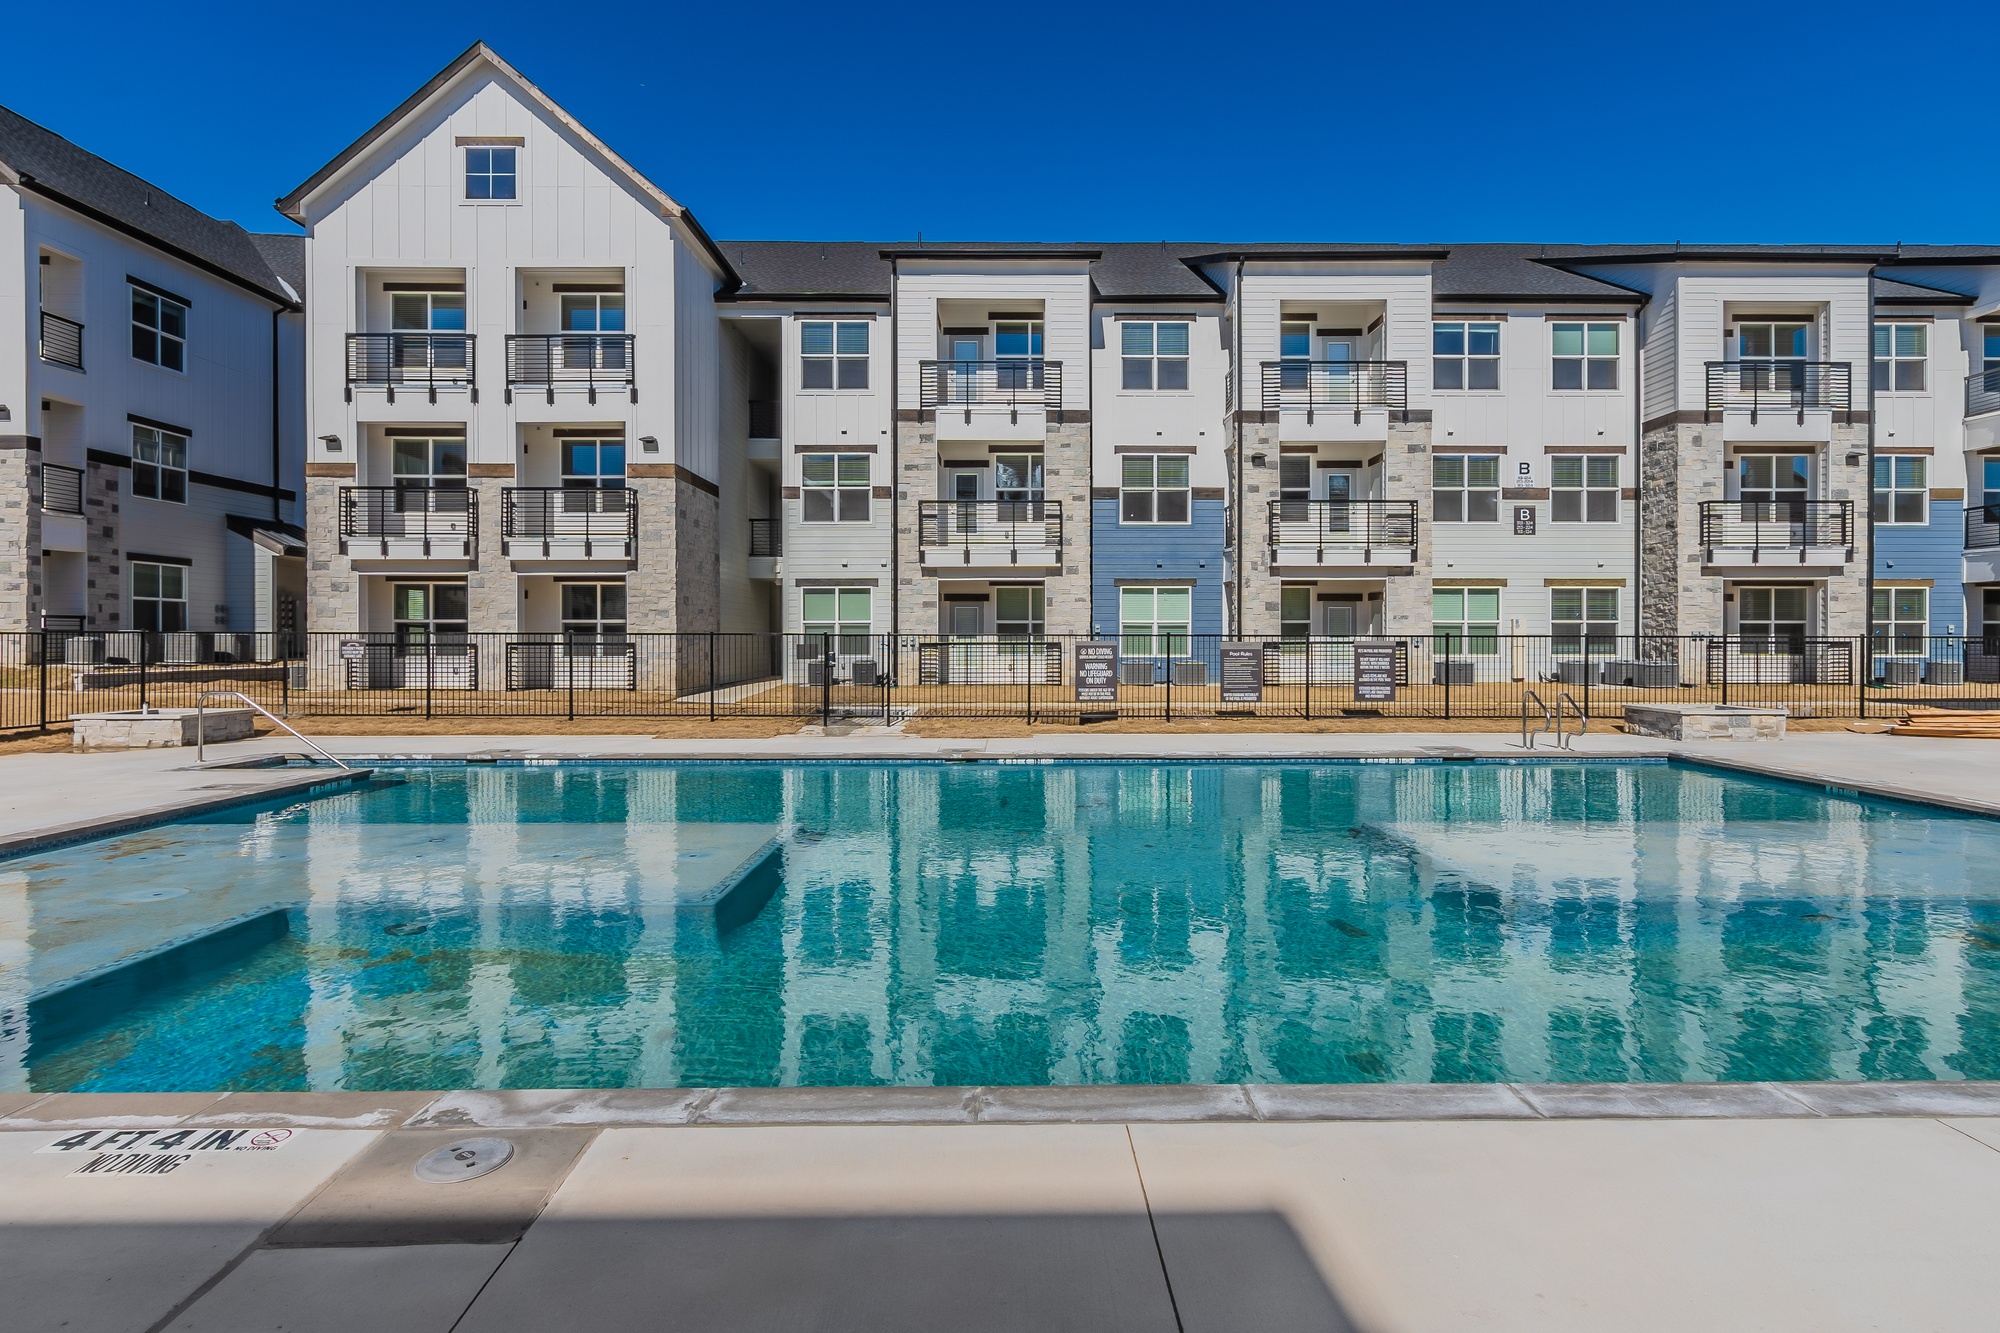 HLC Equity Expands Its Presence in Dallas-Fort Worth Market With Acquisition of New 156-Unit Southgate Apartment Community in Princeton